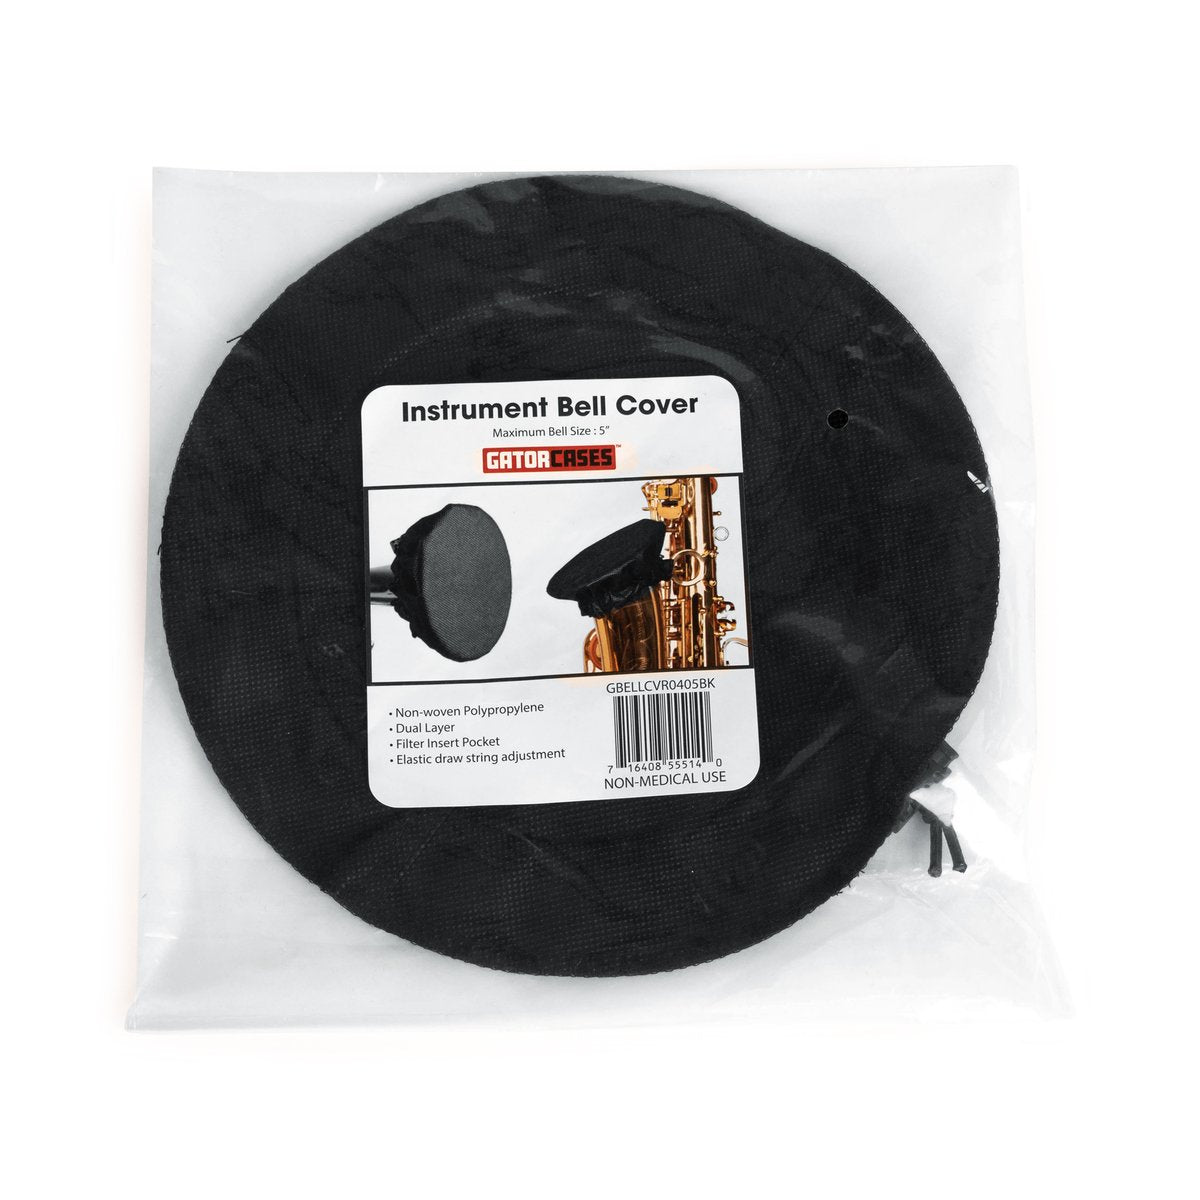 Wind Instrument Double-Layer Cover for Bell Sizes Ranging from 20 to 21-Inches – Black Color